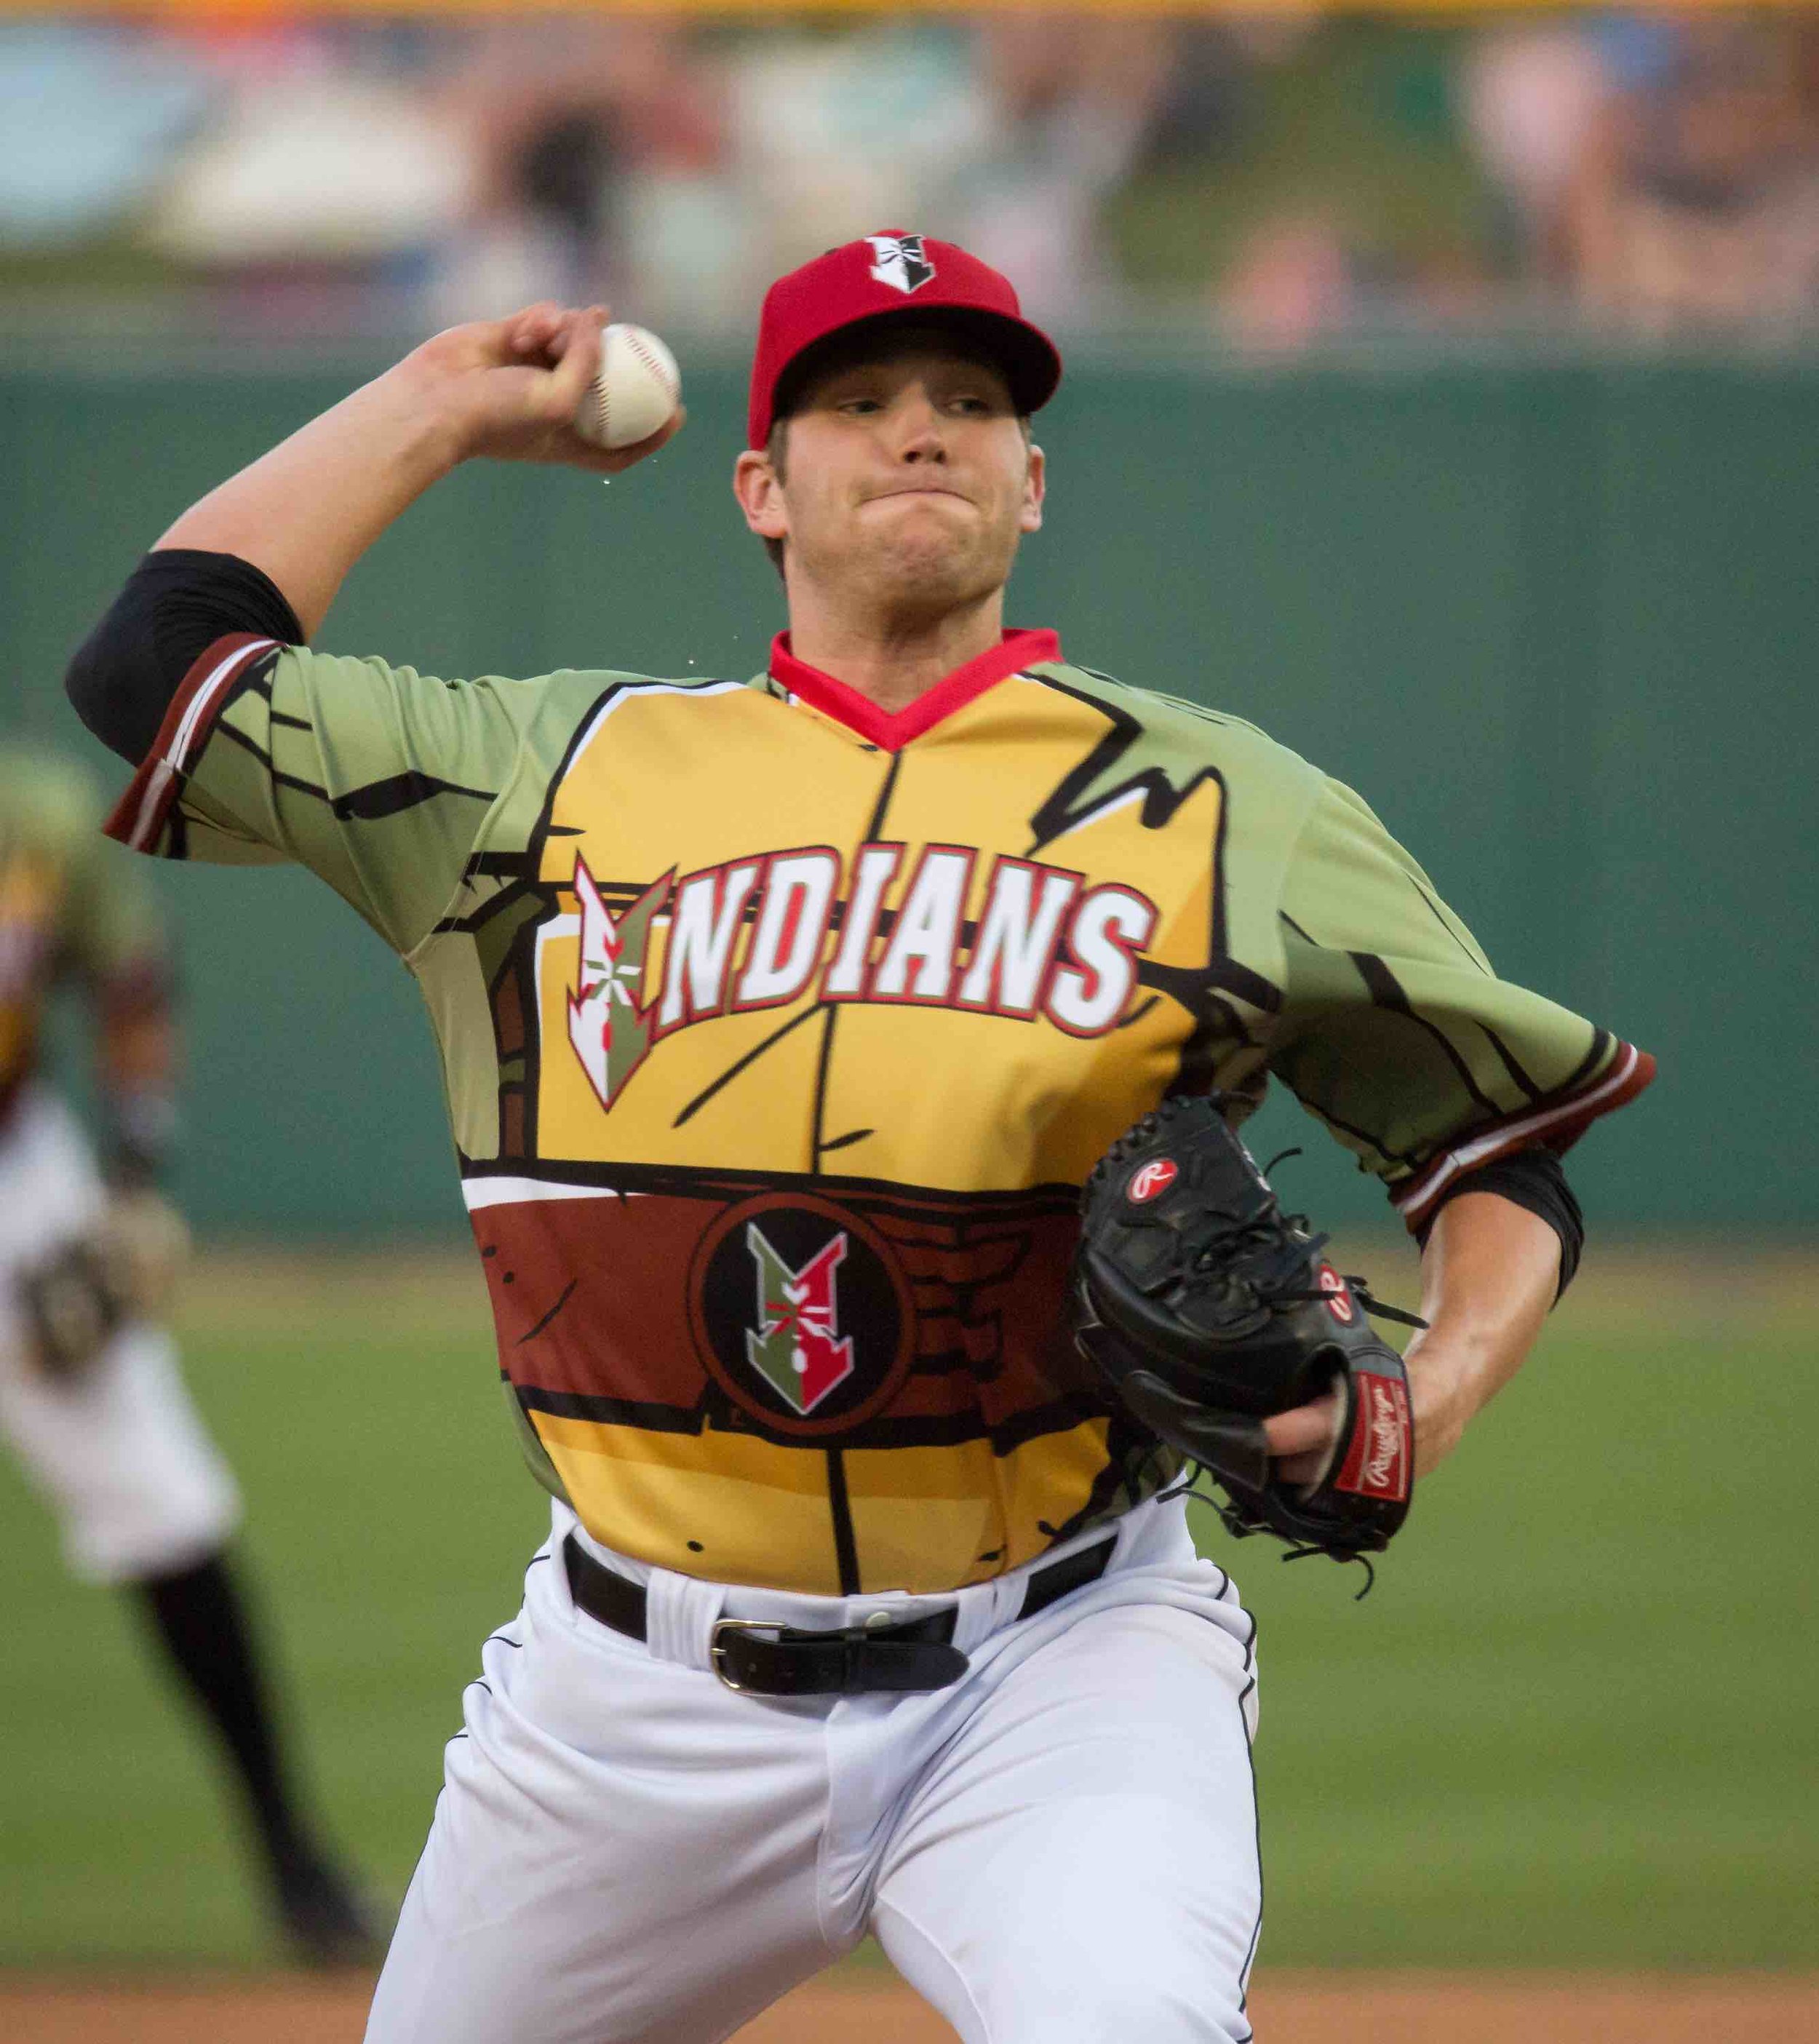 Myrtle Beach Pelicans: Better Health is Priceless jersey auction